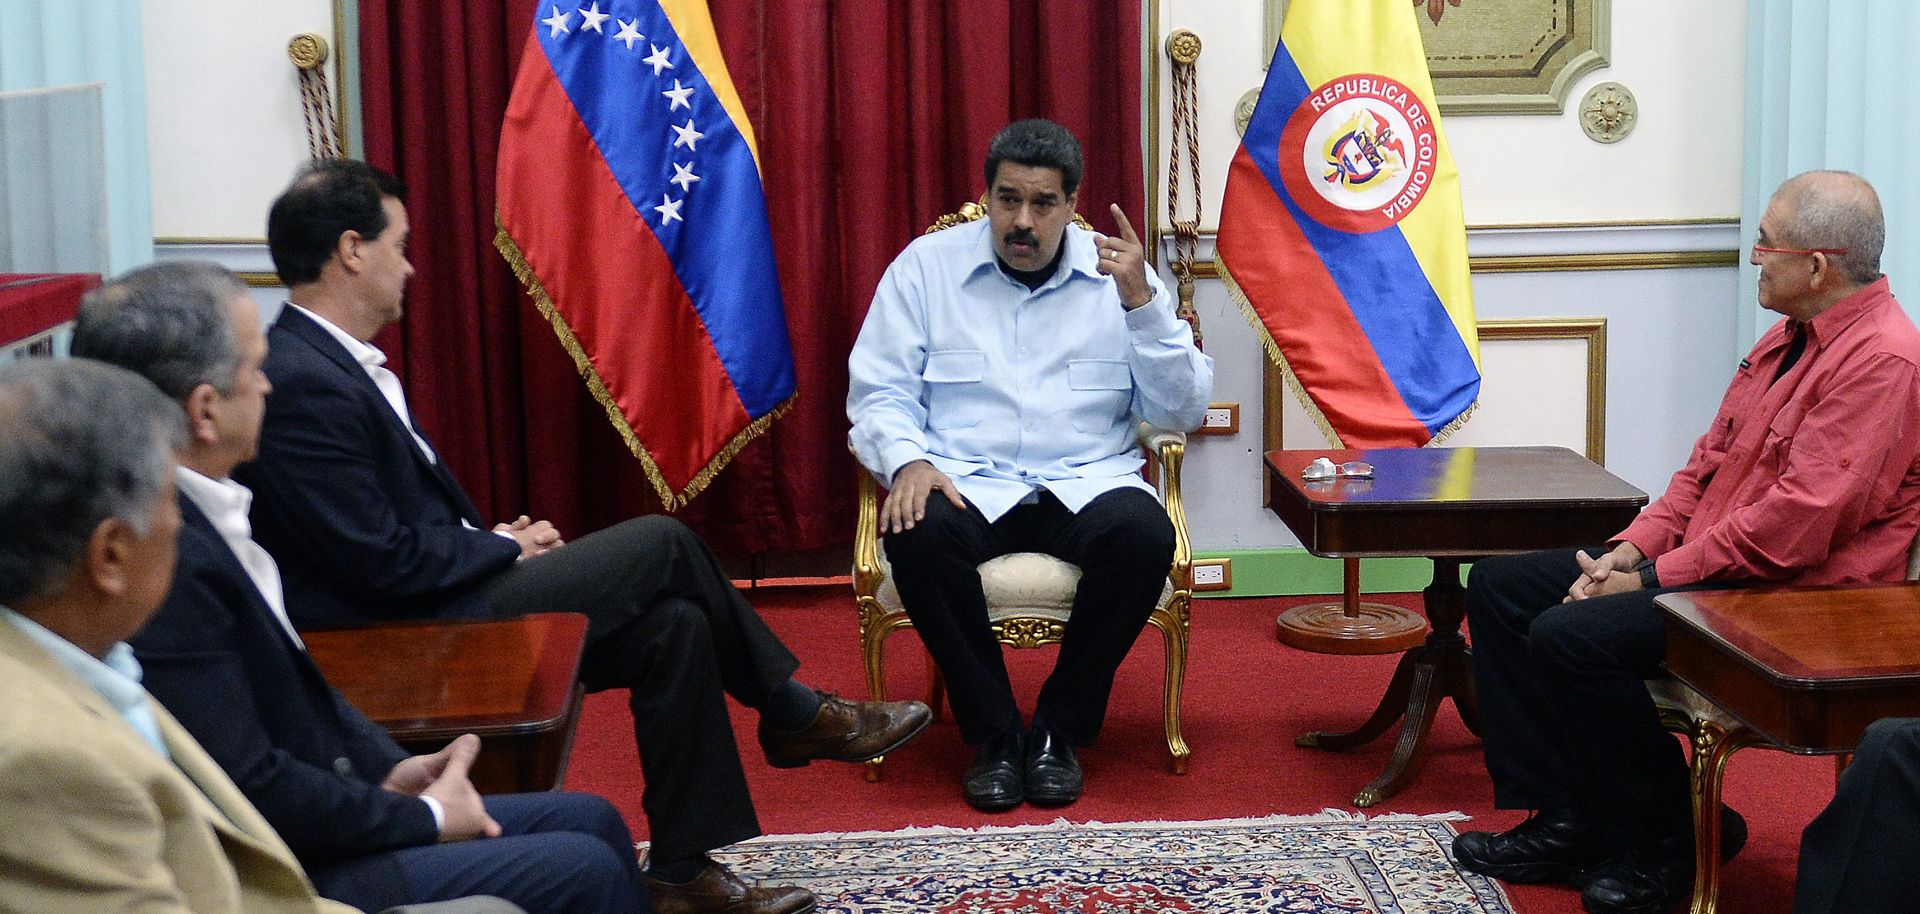 Venezuelan President Nicolas Maduro (C), Colombian lead negotiator Frank Pearl (C-L), and the ELN guerrilla known as Antonio Garcia (C-R) are pictured with members of their delegations at Miraflores presidential palace in Caracas on March 30.